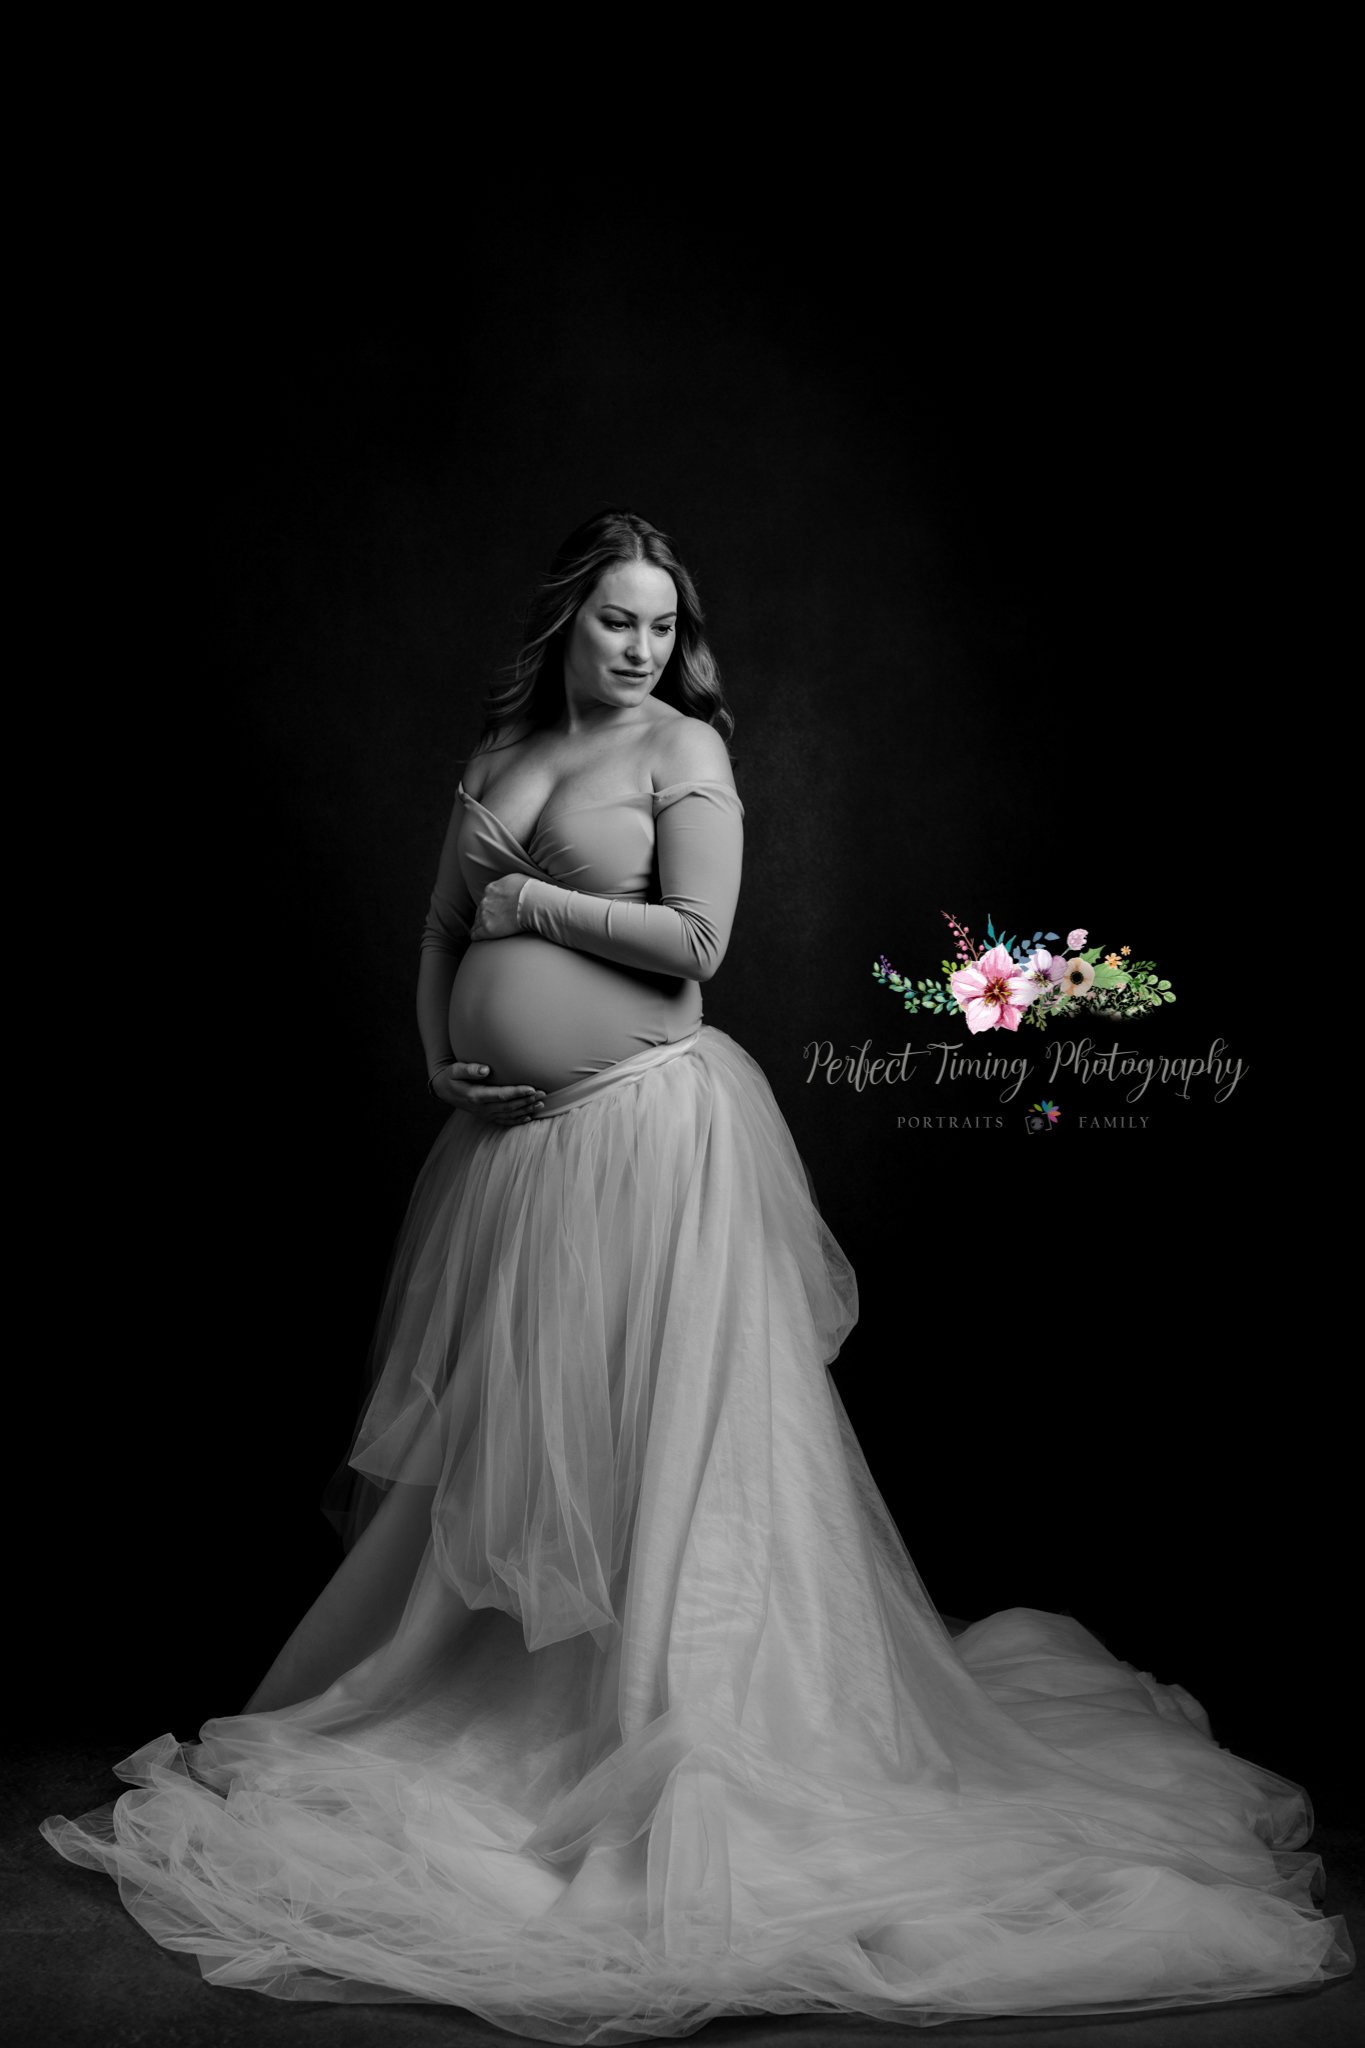 Maternity_Perfect Timing Photography_008.jpg